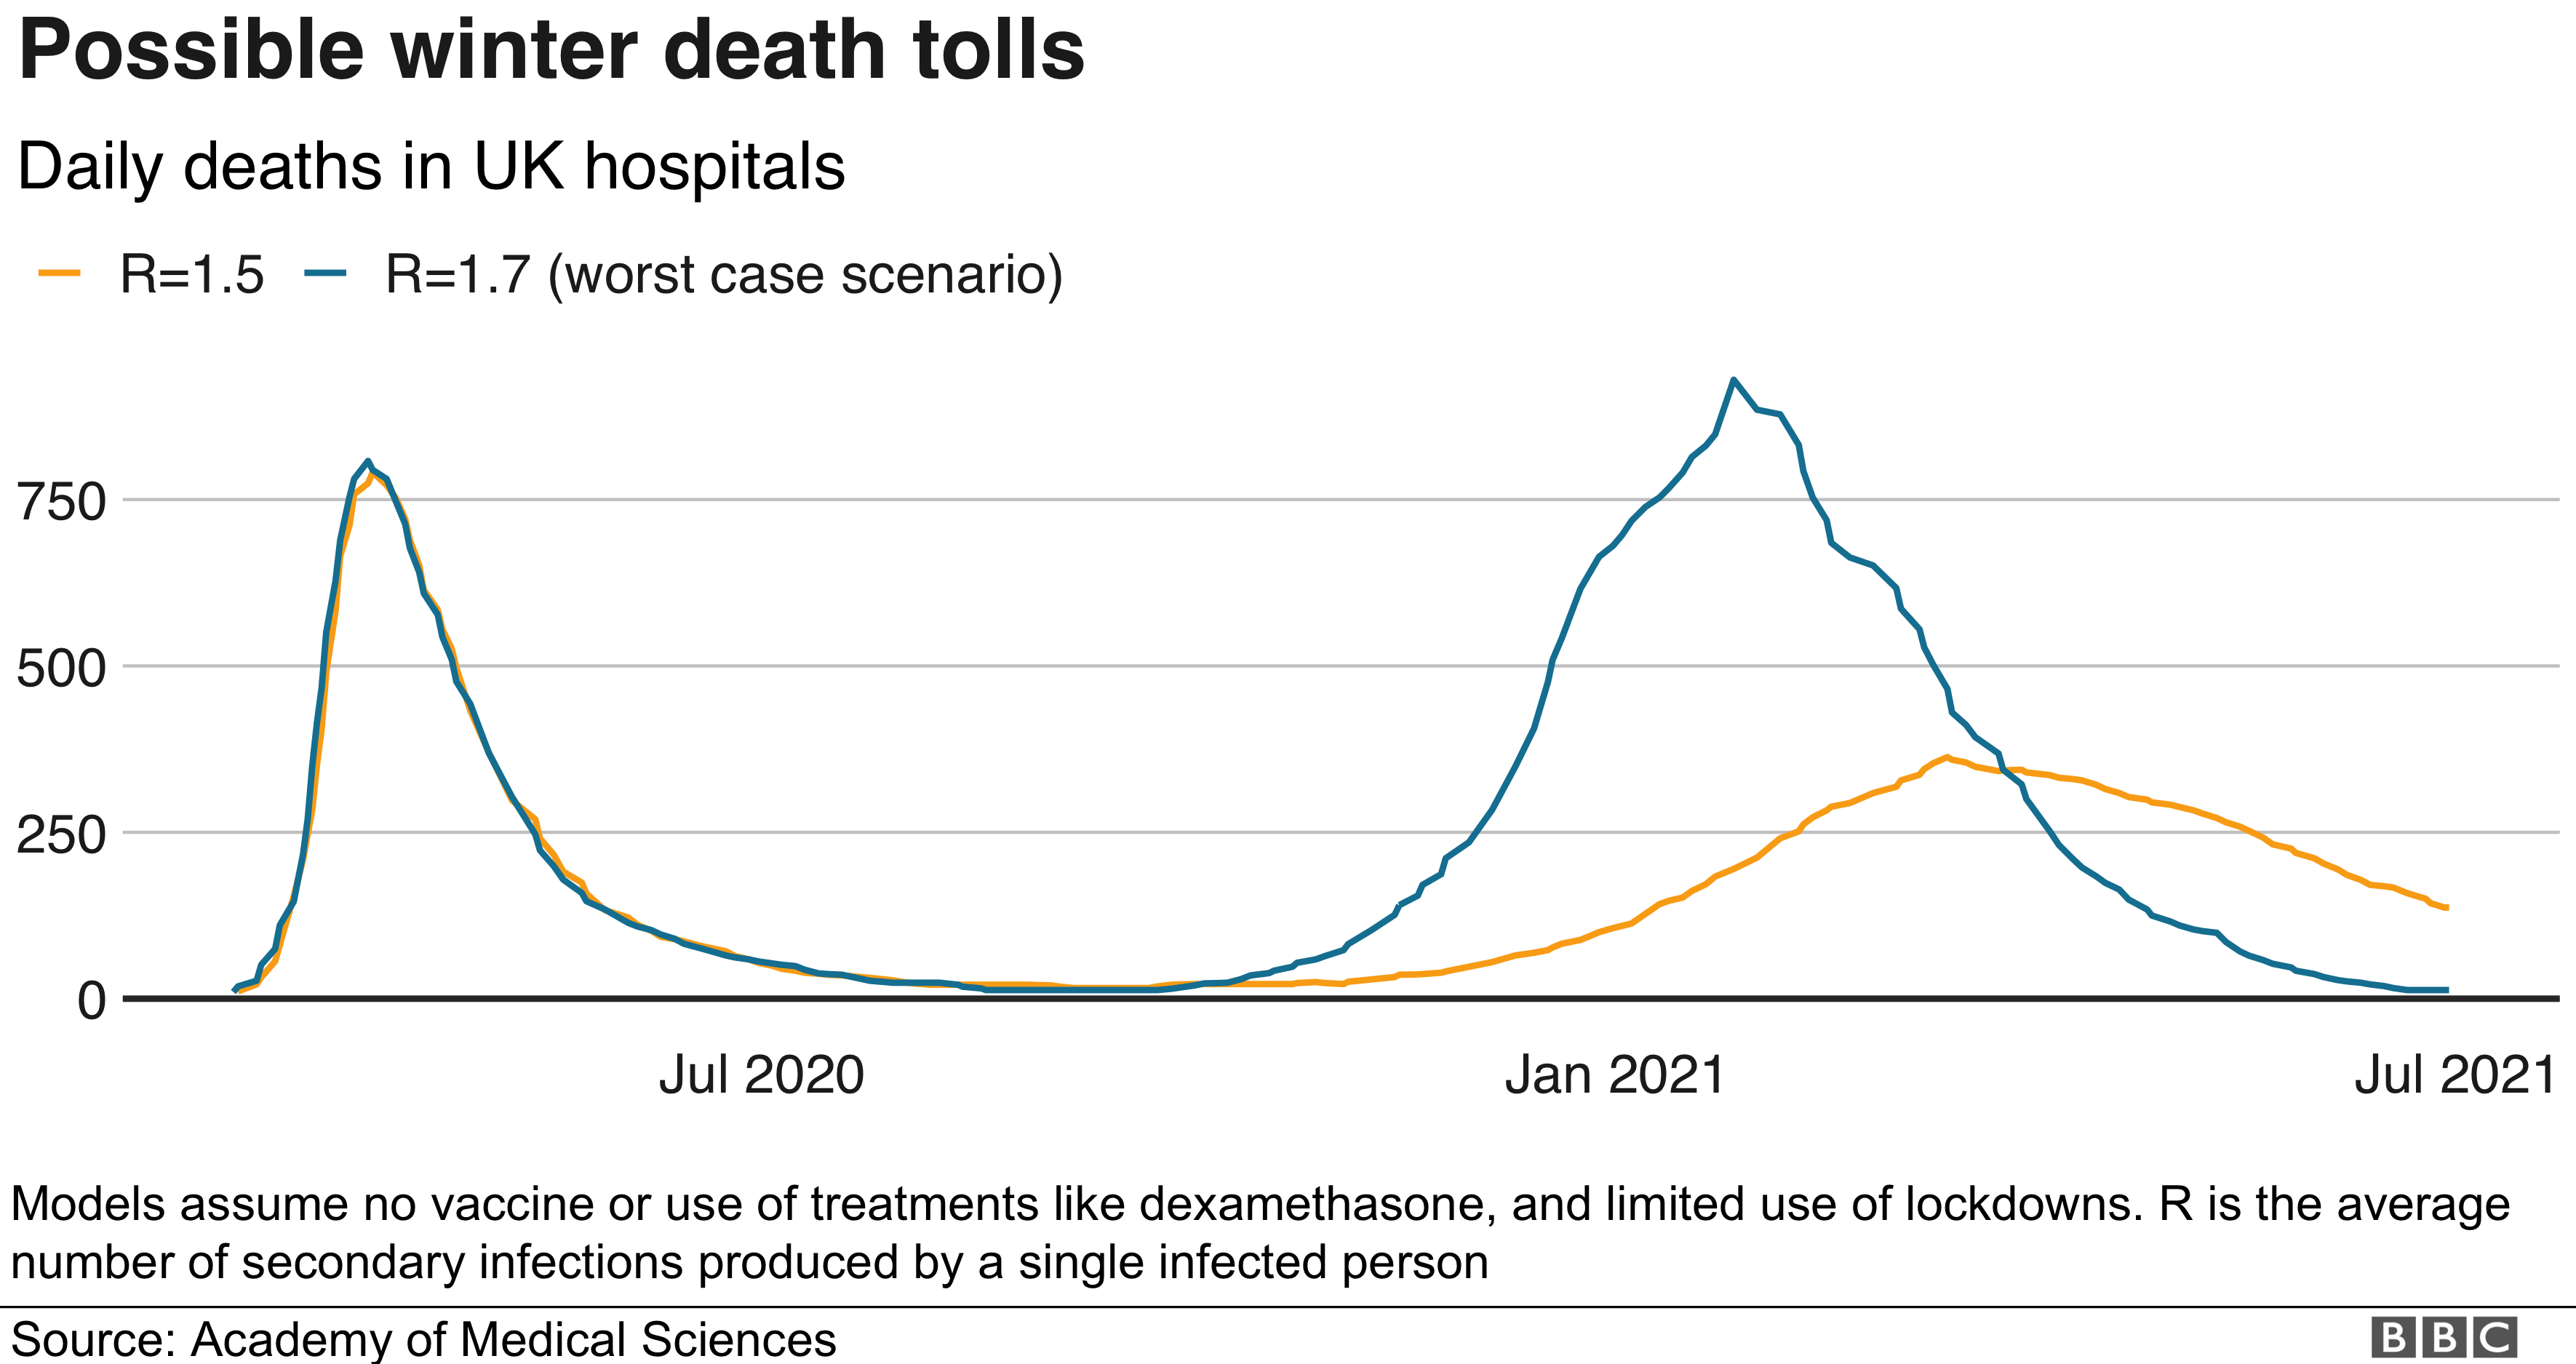 Graph showing possible winter death tolls in UK hospitals